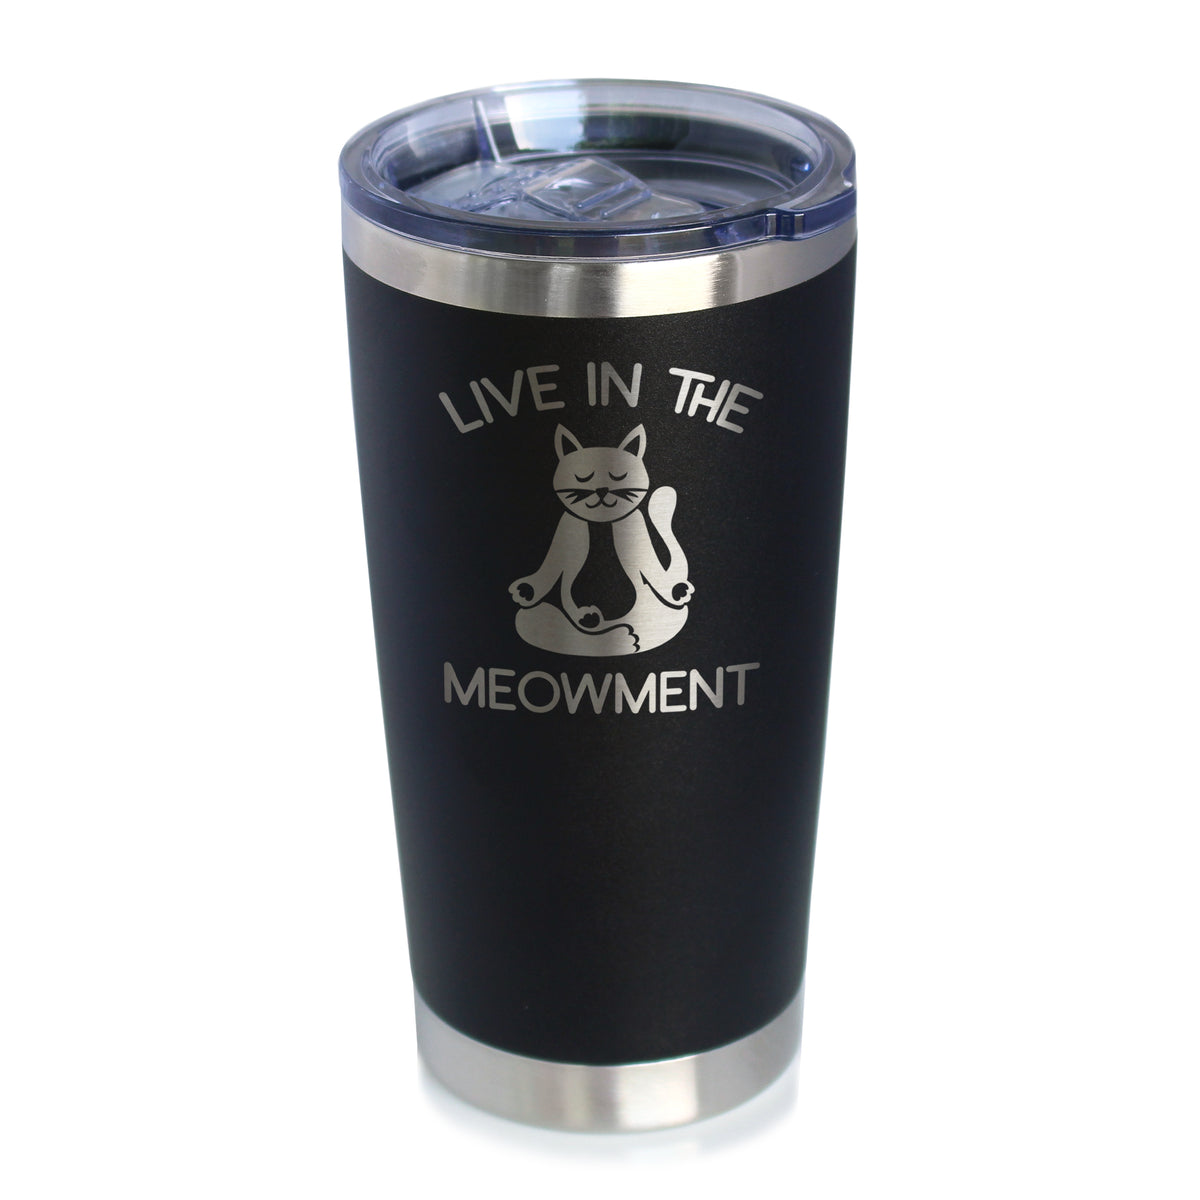 Live in the Meowment - Funny Cat Insulated Coffee Tumbler Cup with Sliding Lid - Stainless Steel Travel Mug - Unique Meditation Mindfulness Gift for Women and Men